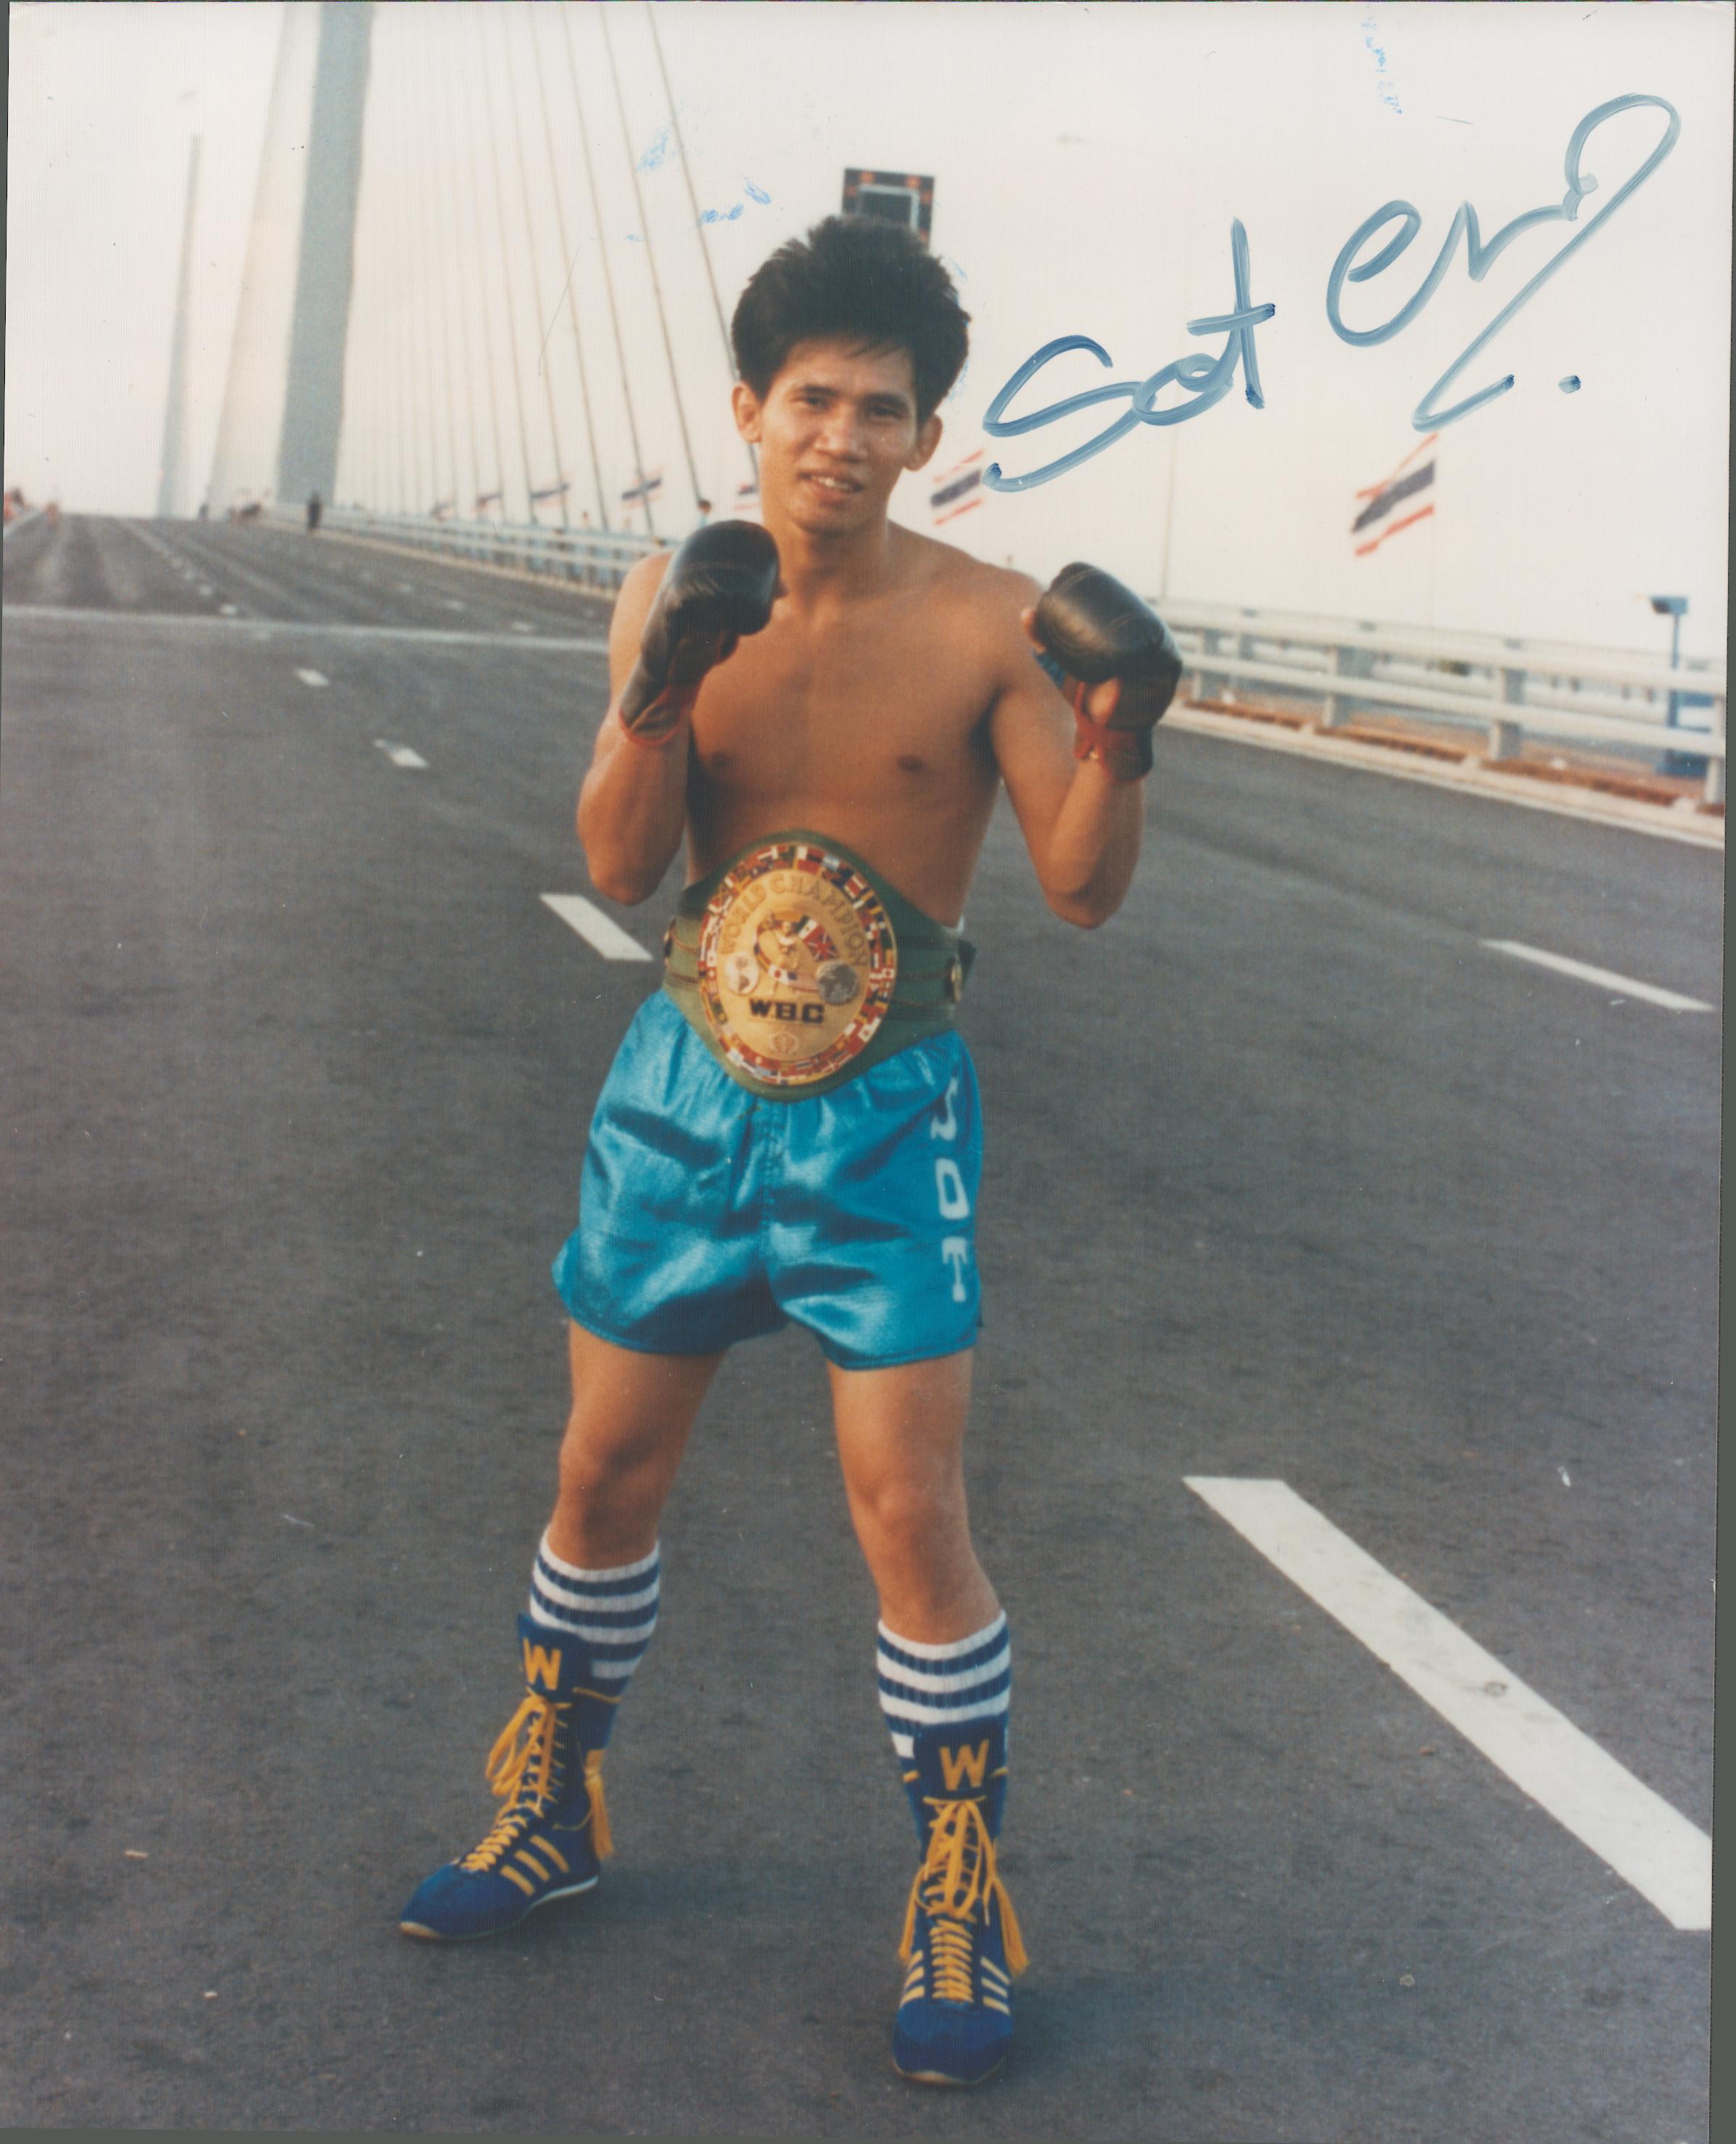 Boxing Sot Chitalada Hand signed 10x8 Colour Photo showing Chitalada with WBC Belt on a bridge. A